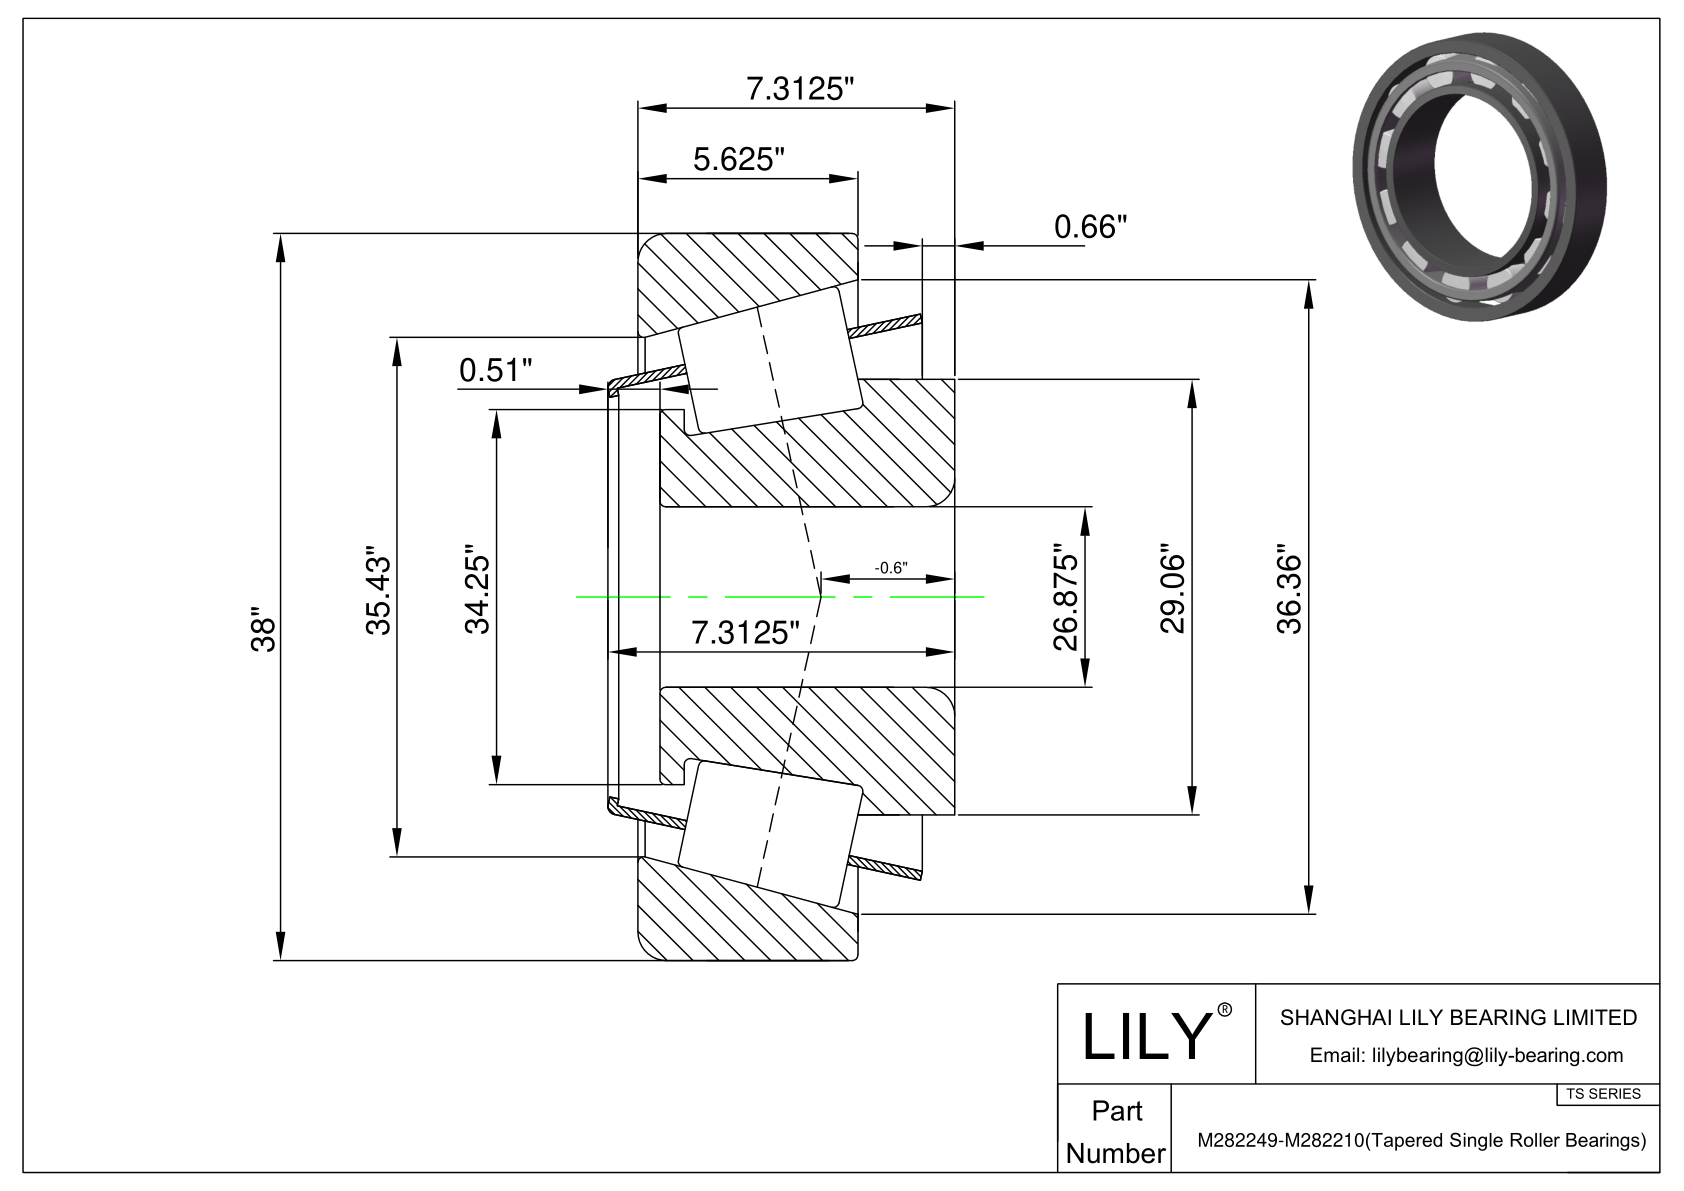 M282249-M282210 TS (Tapered Single Roller Bearings) (Imperial) cad drawing